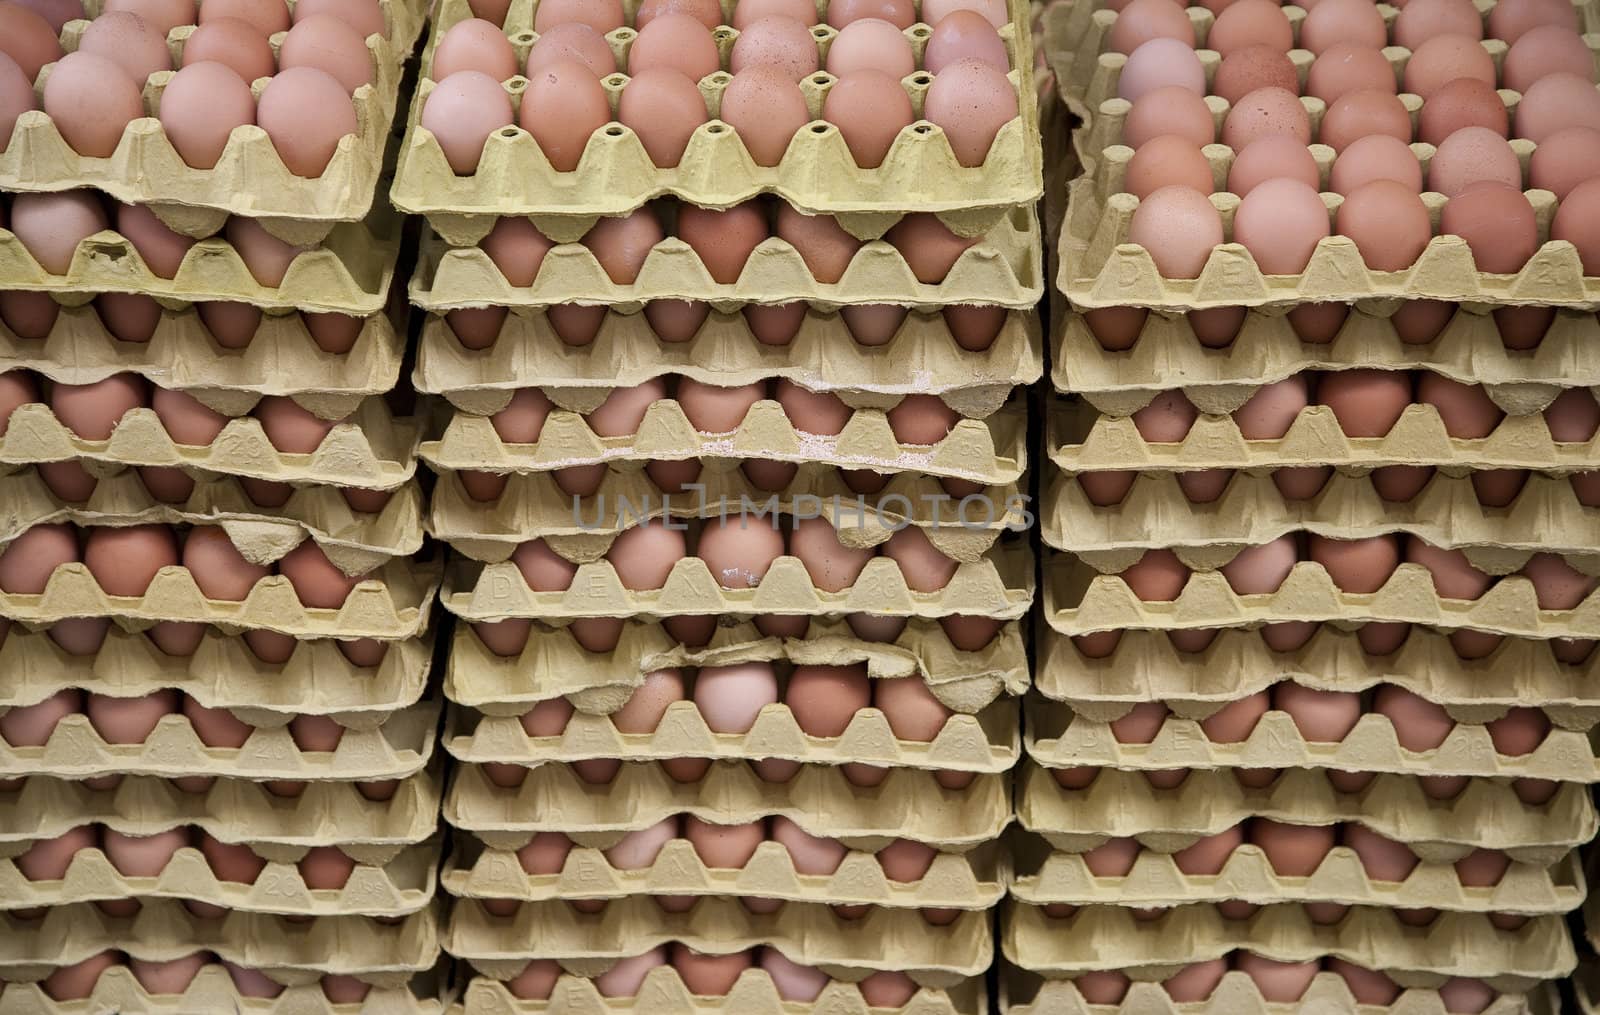 Loads of eggs for sale by ABCDK